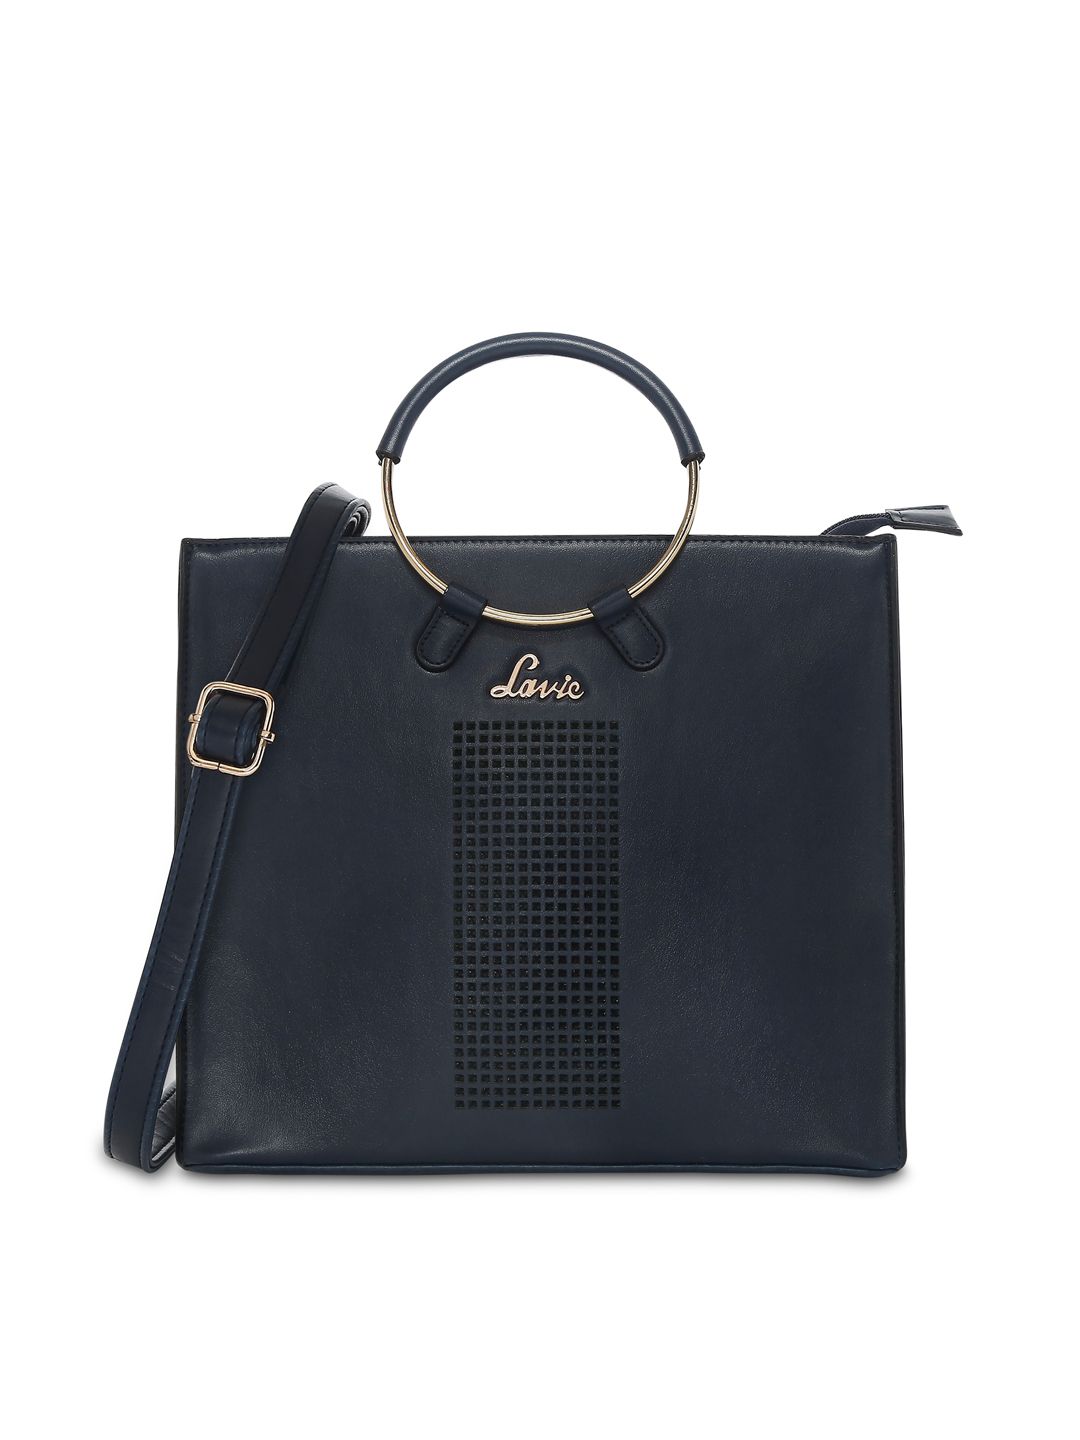 Lavie Navy Blue Laser Cut Structured Handheld Bag with Detachable Sling Strap Price in India